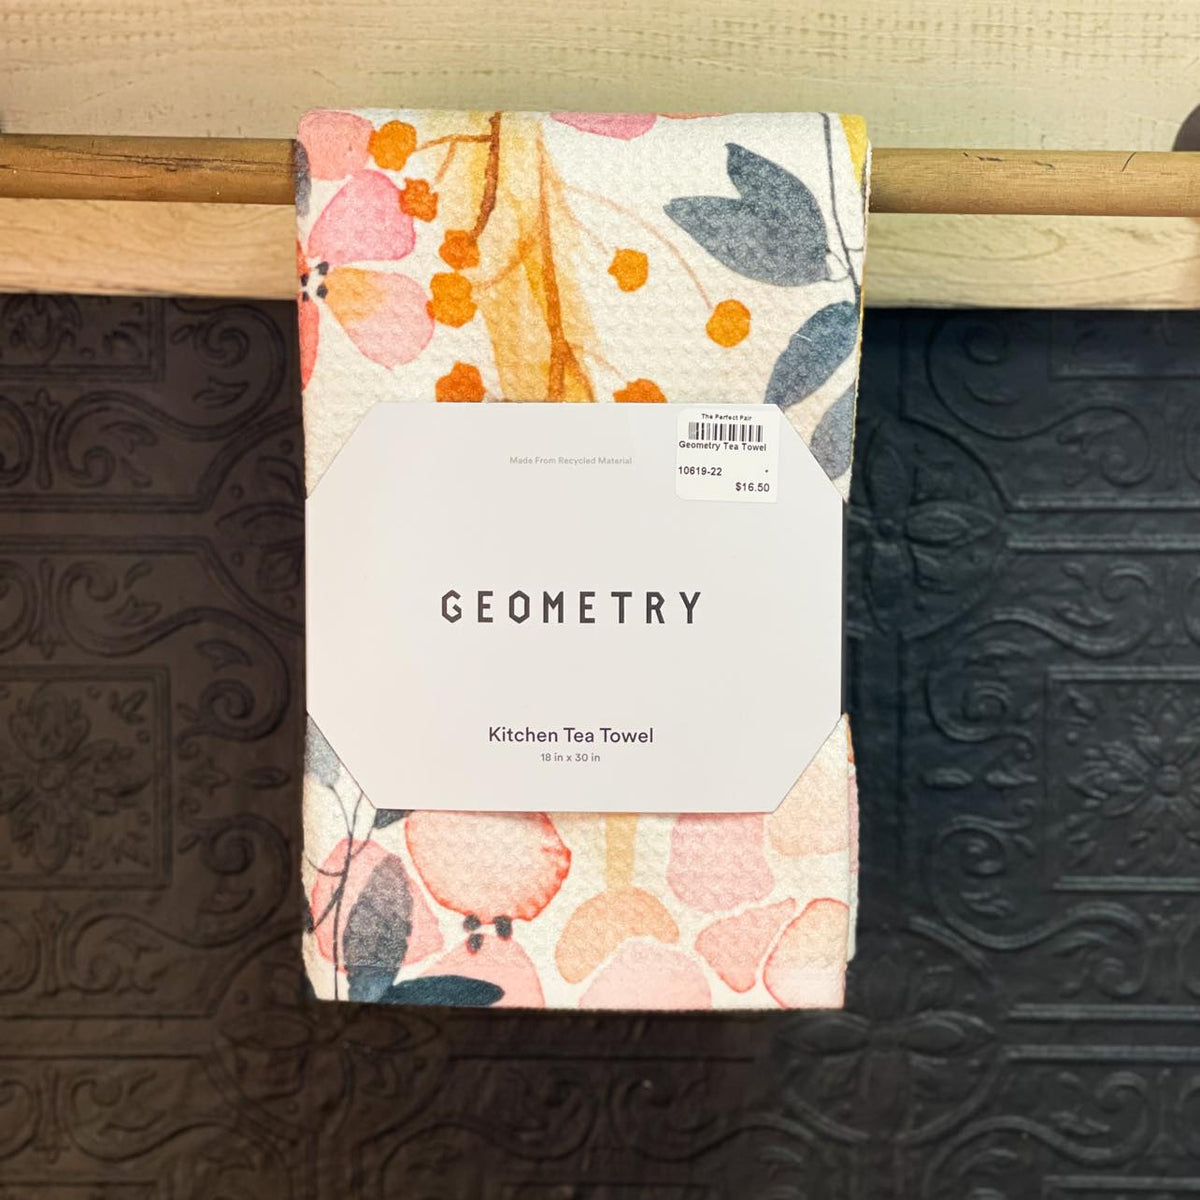 We are loving the Geometry Tea Towels that we now offer! They come